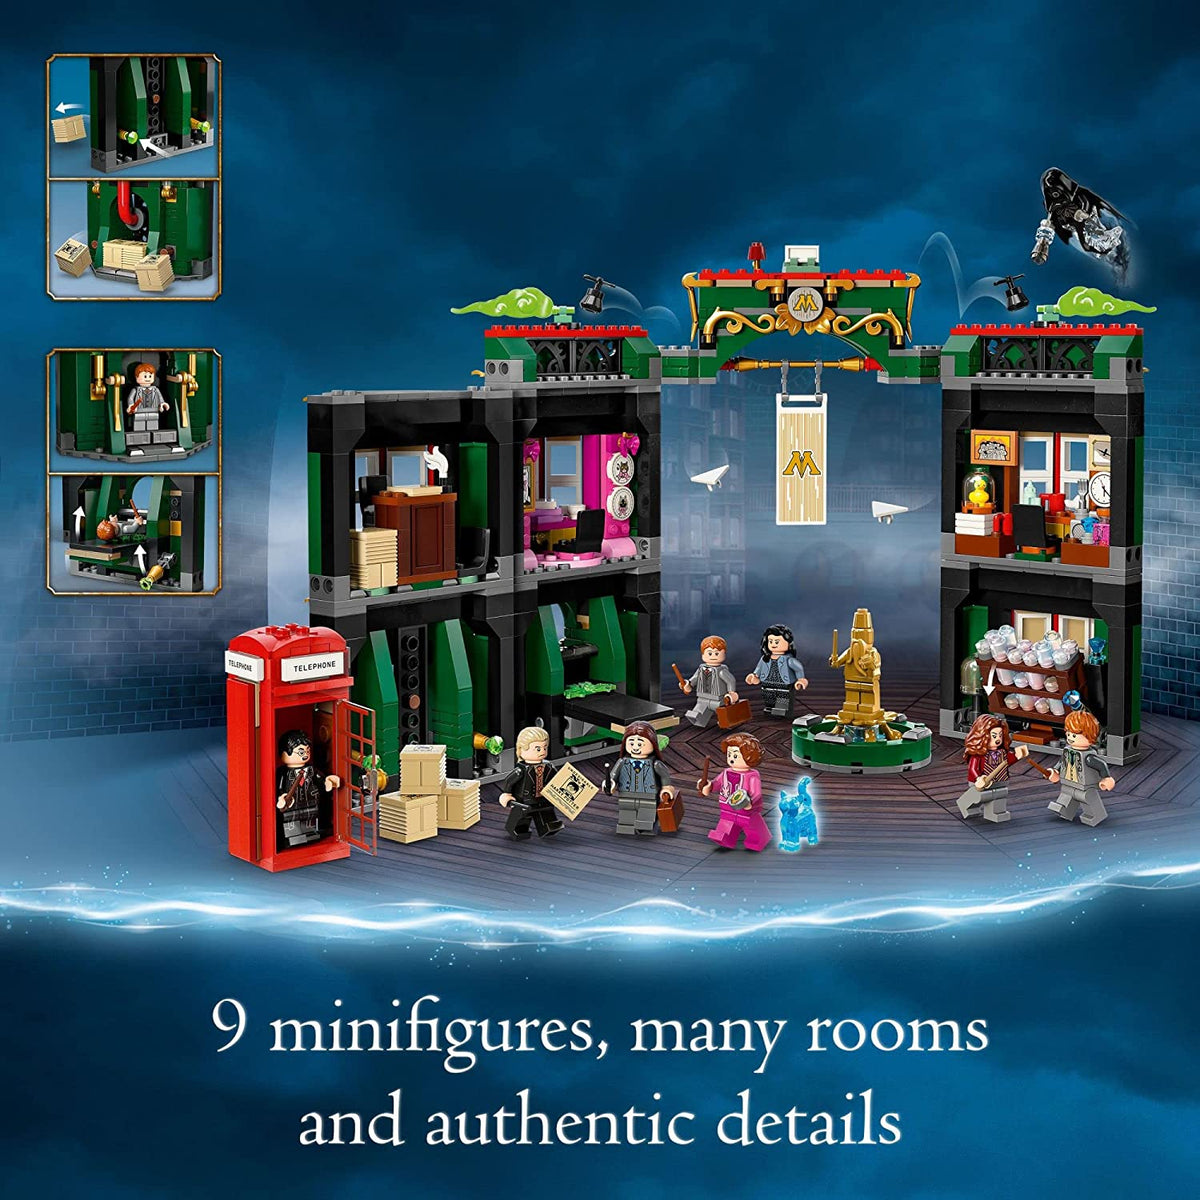 Lego 76403 Harry Potter The Ministry of Magic